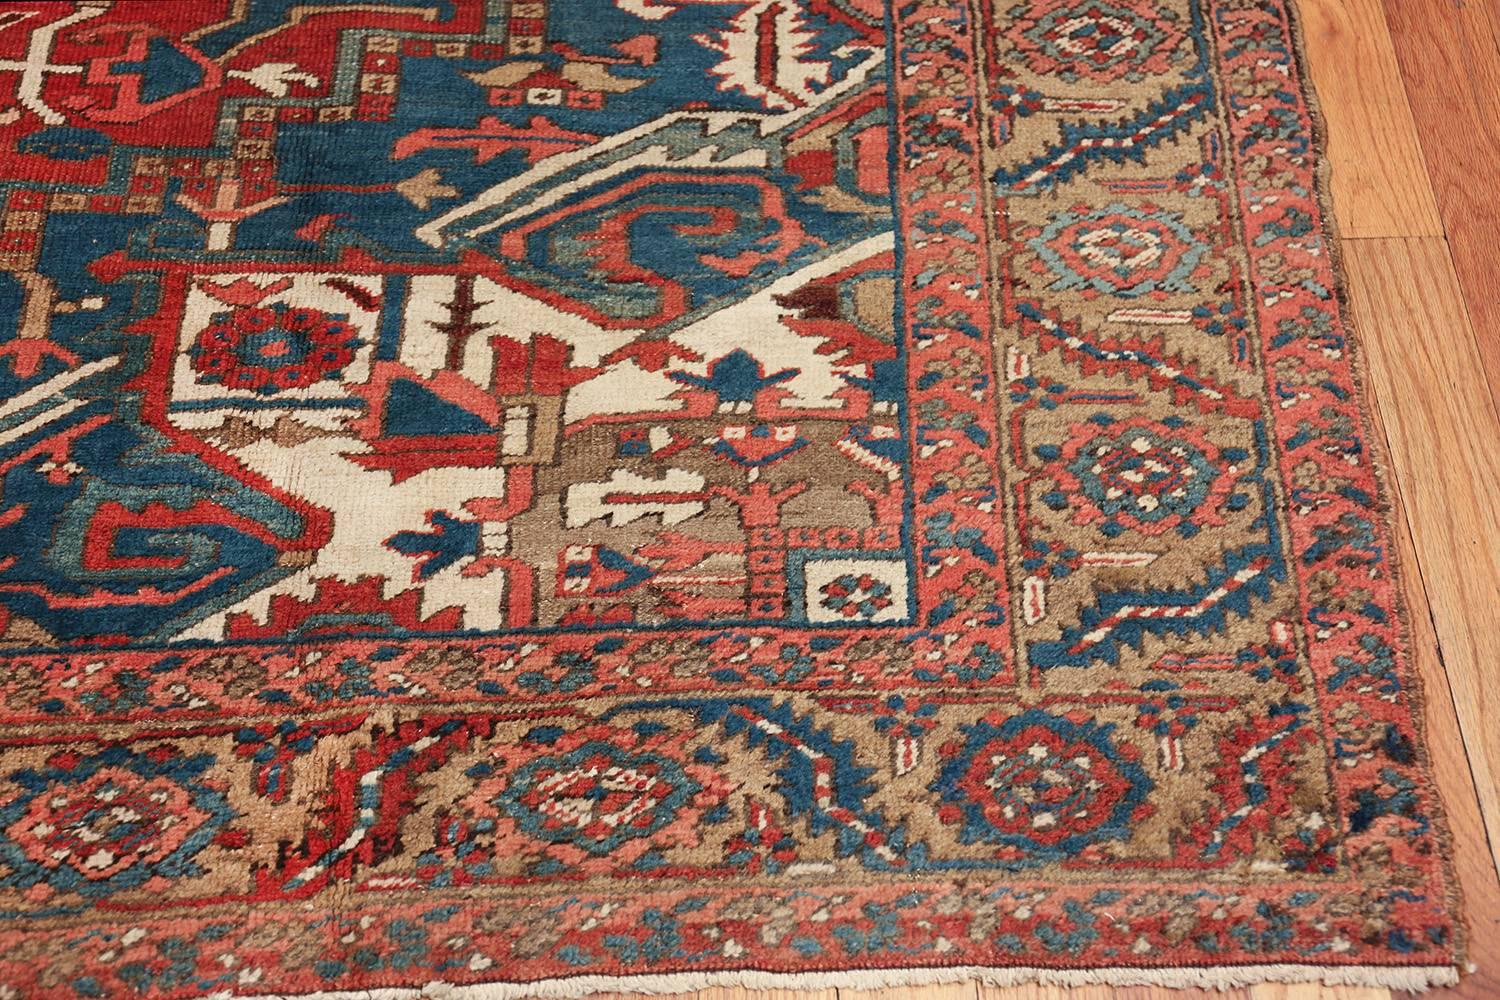 Breathtaking room size antique Persian Heriz rug, country of origin / rug type: Persian rug, circa date: 1920. Size: 10 ft x 13 ft (3.05 m x 3.96 m)

This magnificent room size antique Persian Heriz rug is a truly unique and breathtaking